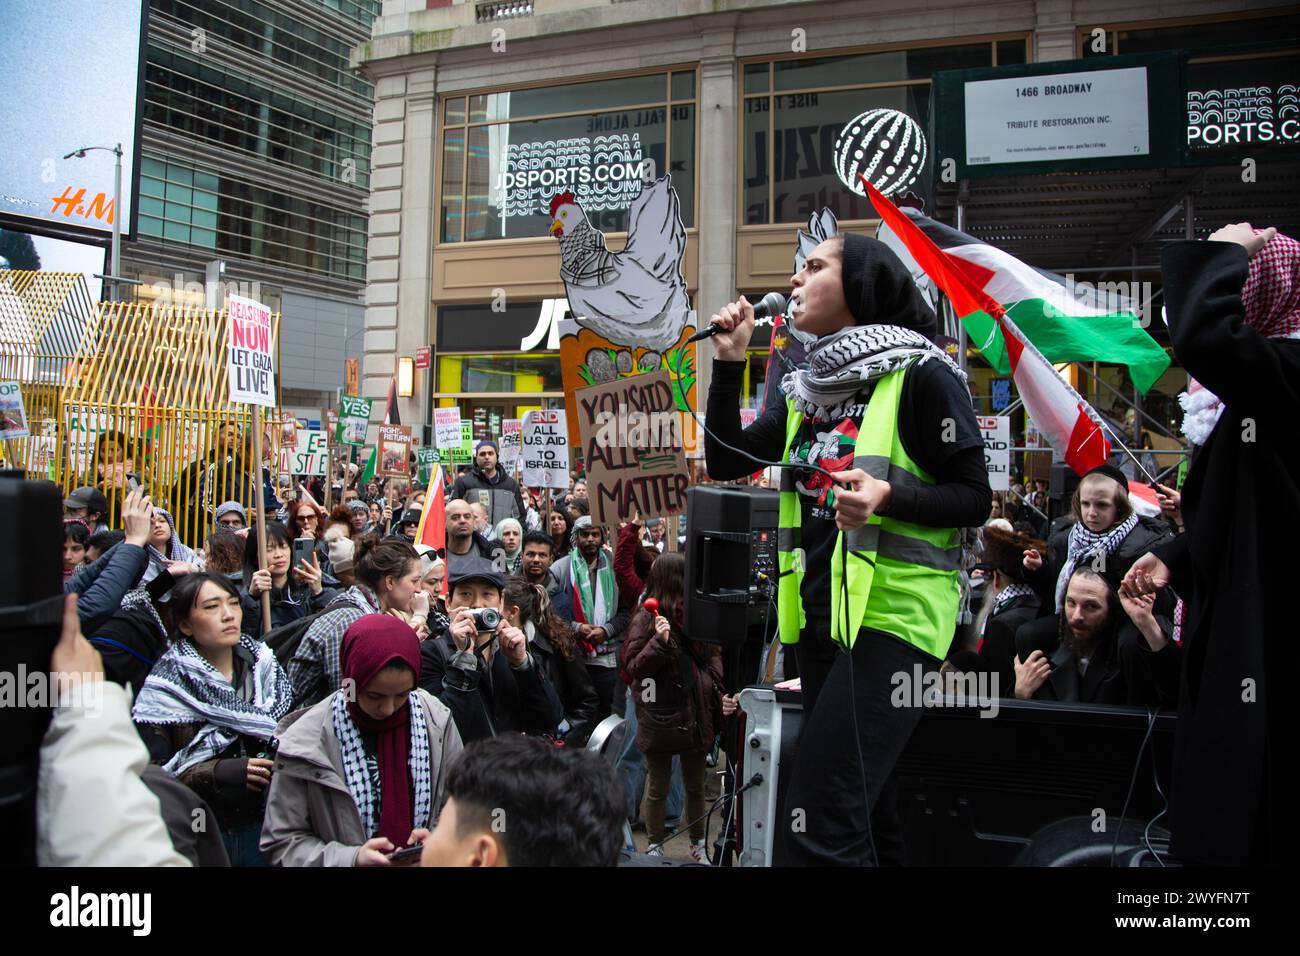 Free Gaza, Cease Fire Now demonstration in Times Square  held on March 30th known as Land Day or Day of the Land. Stock Photo